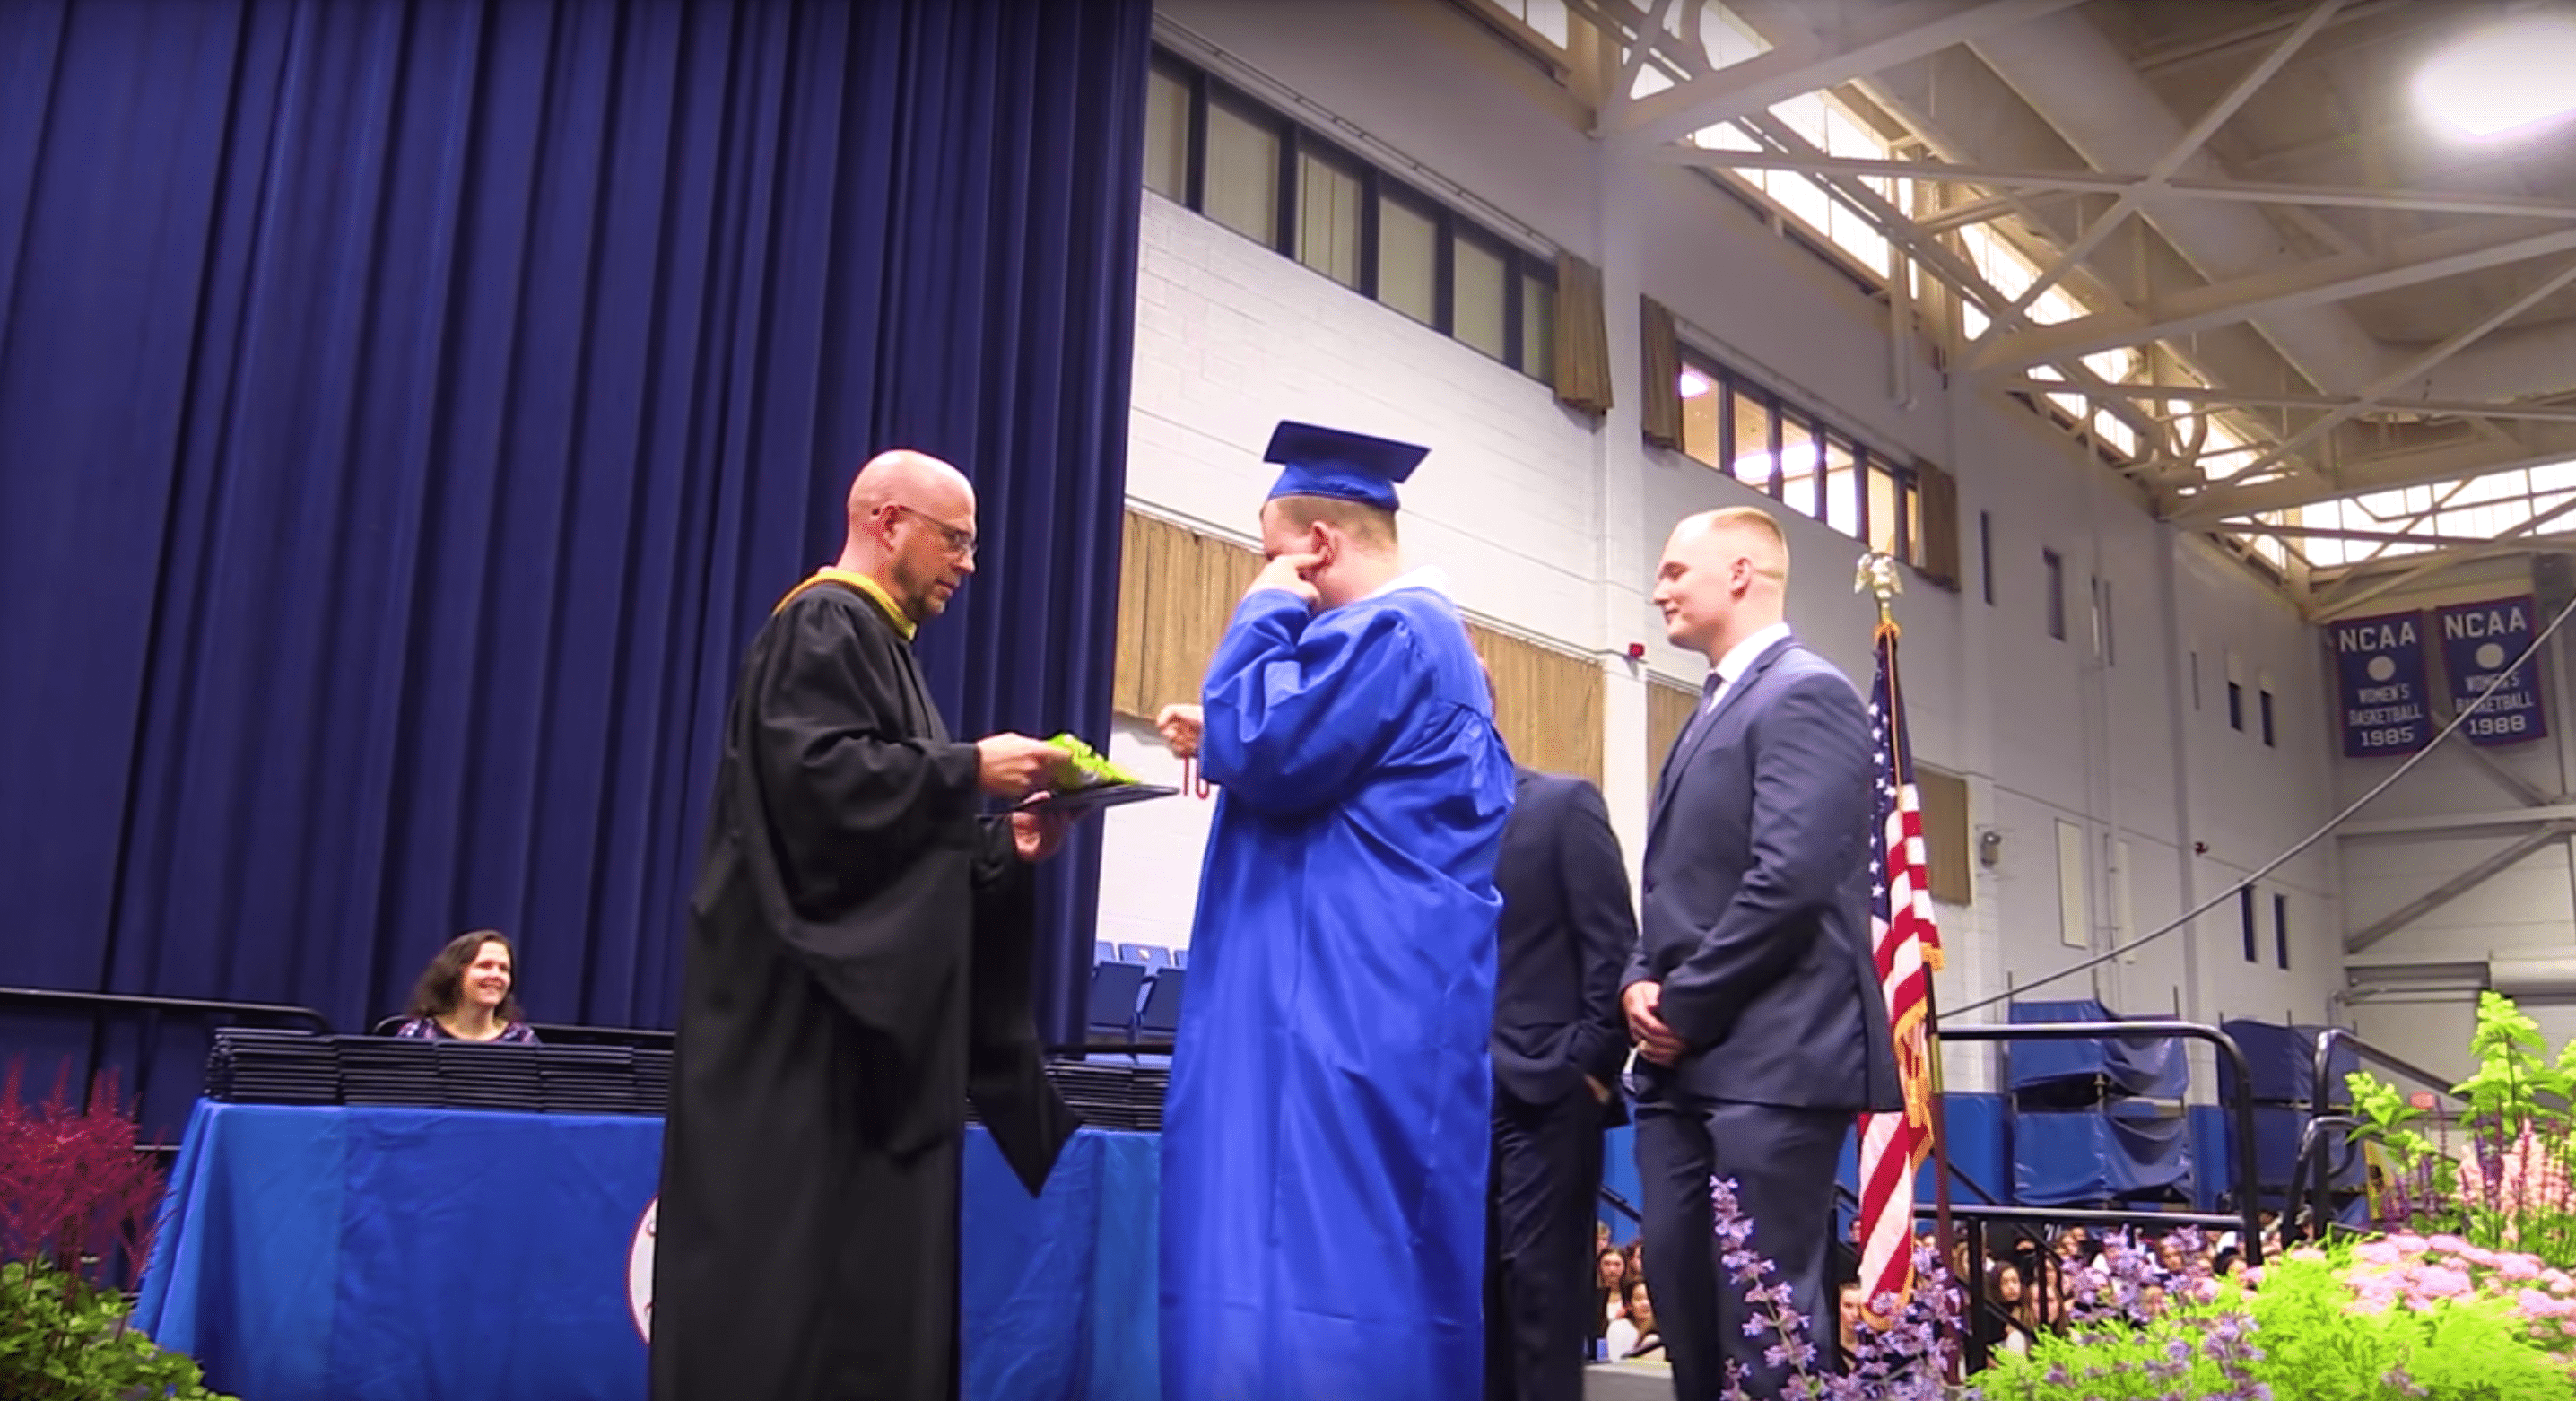 Jack Higgins receiving his certificate during the graduation ceremony. | Source: YouTube:  RaneyDayMedia